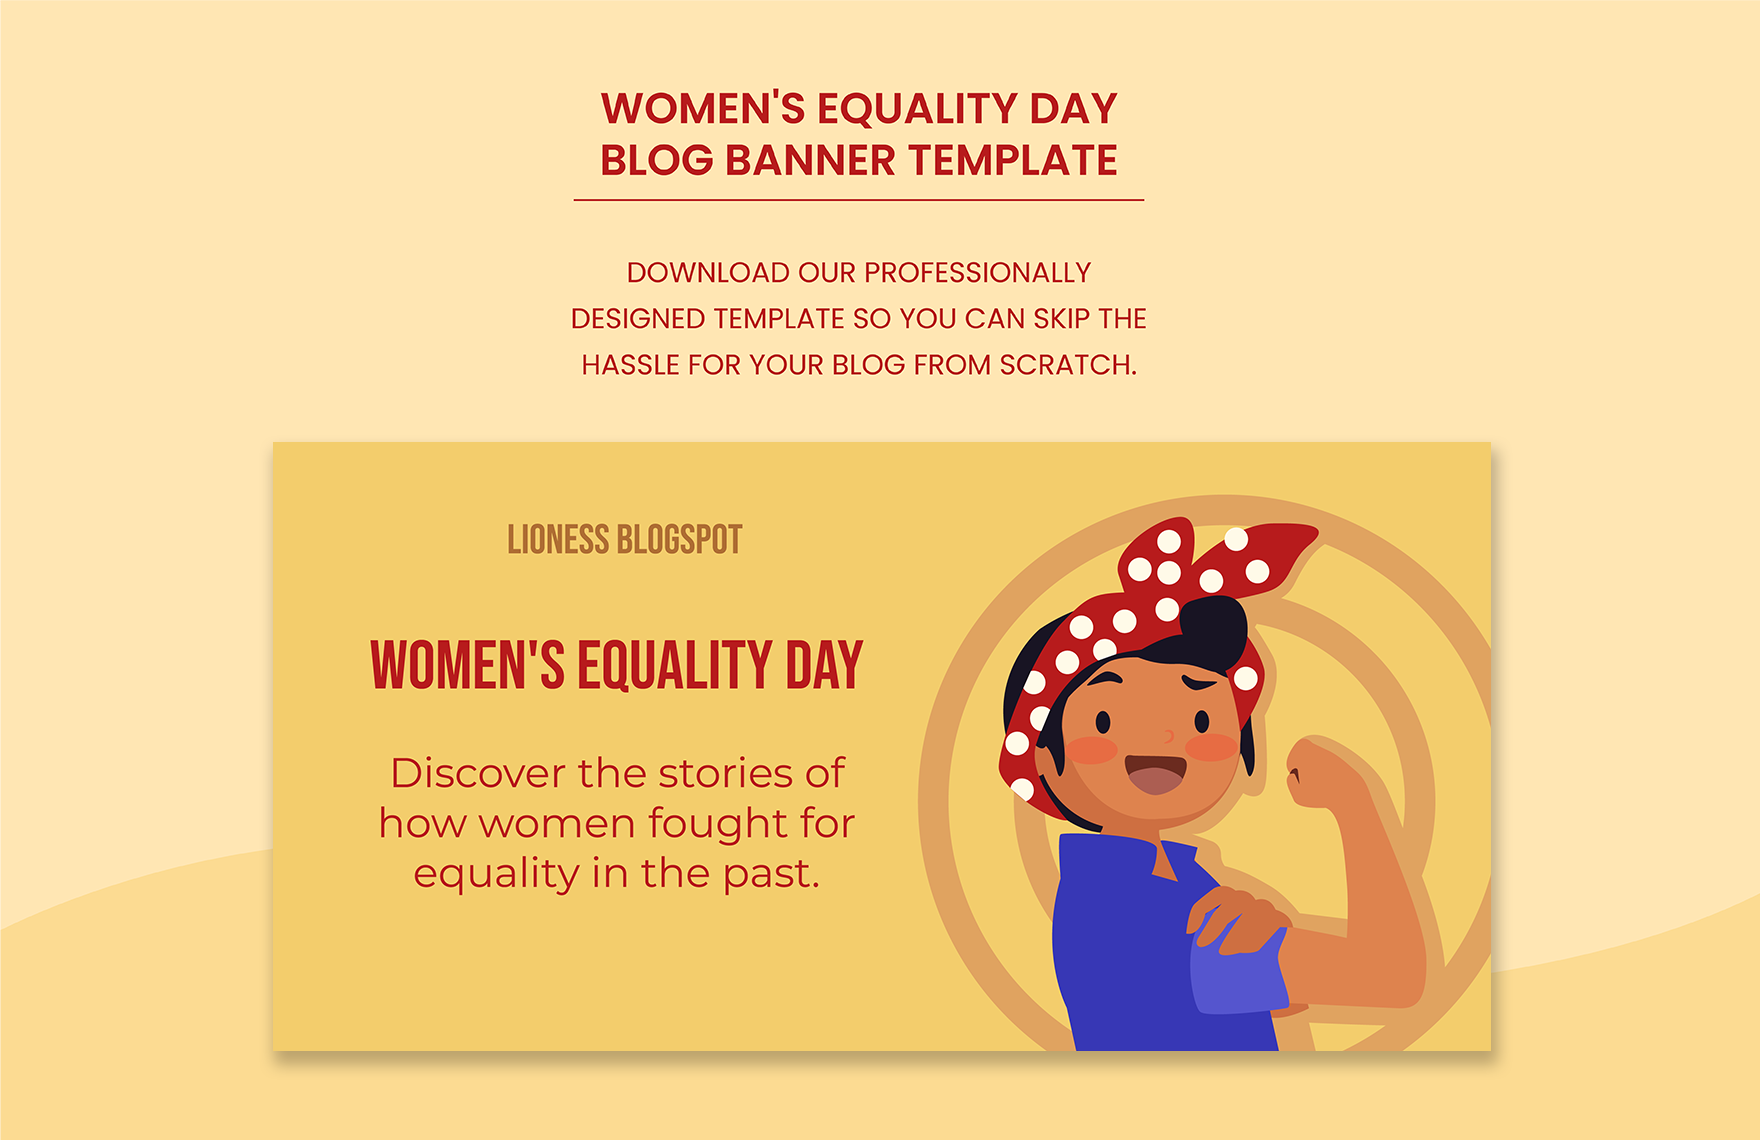 Women's Equality Day Blog Banner Template